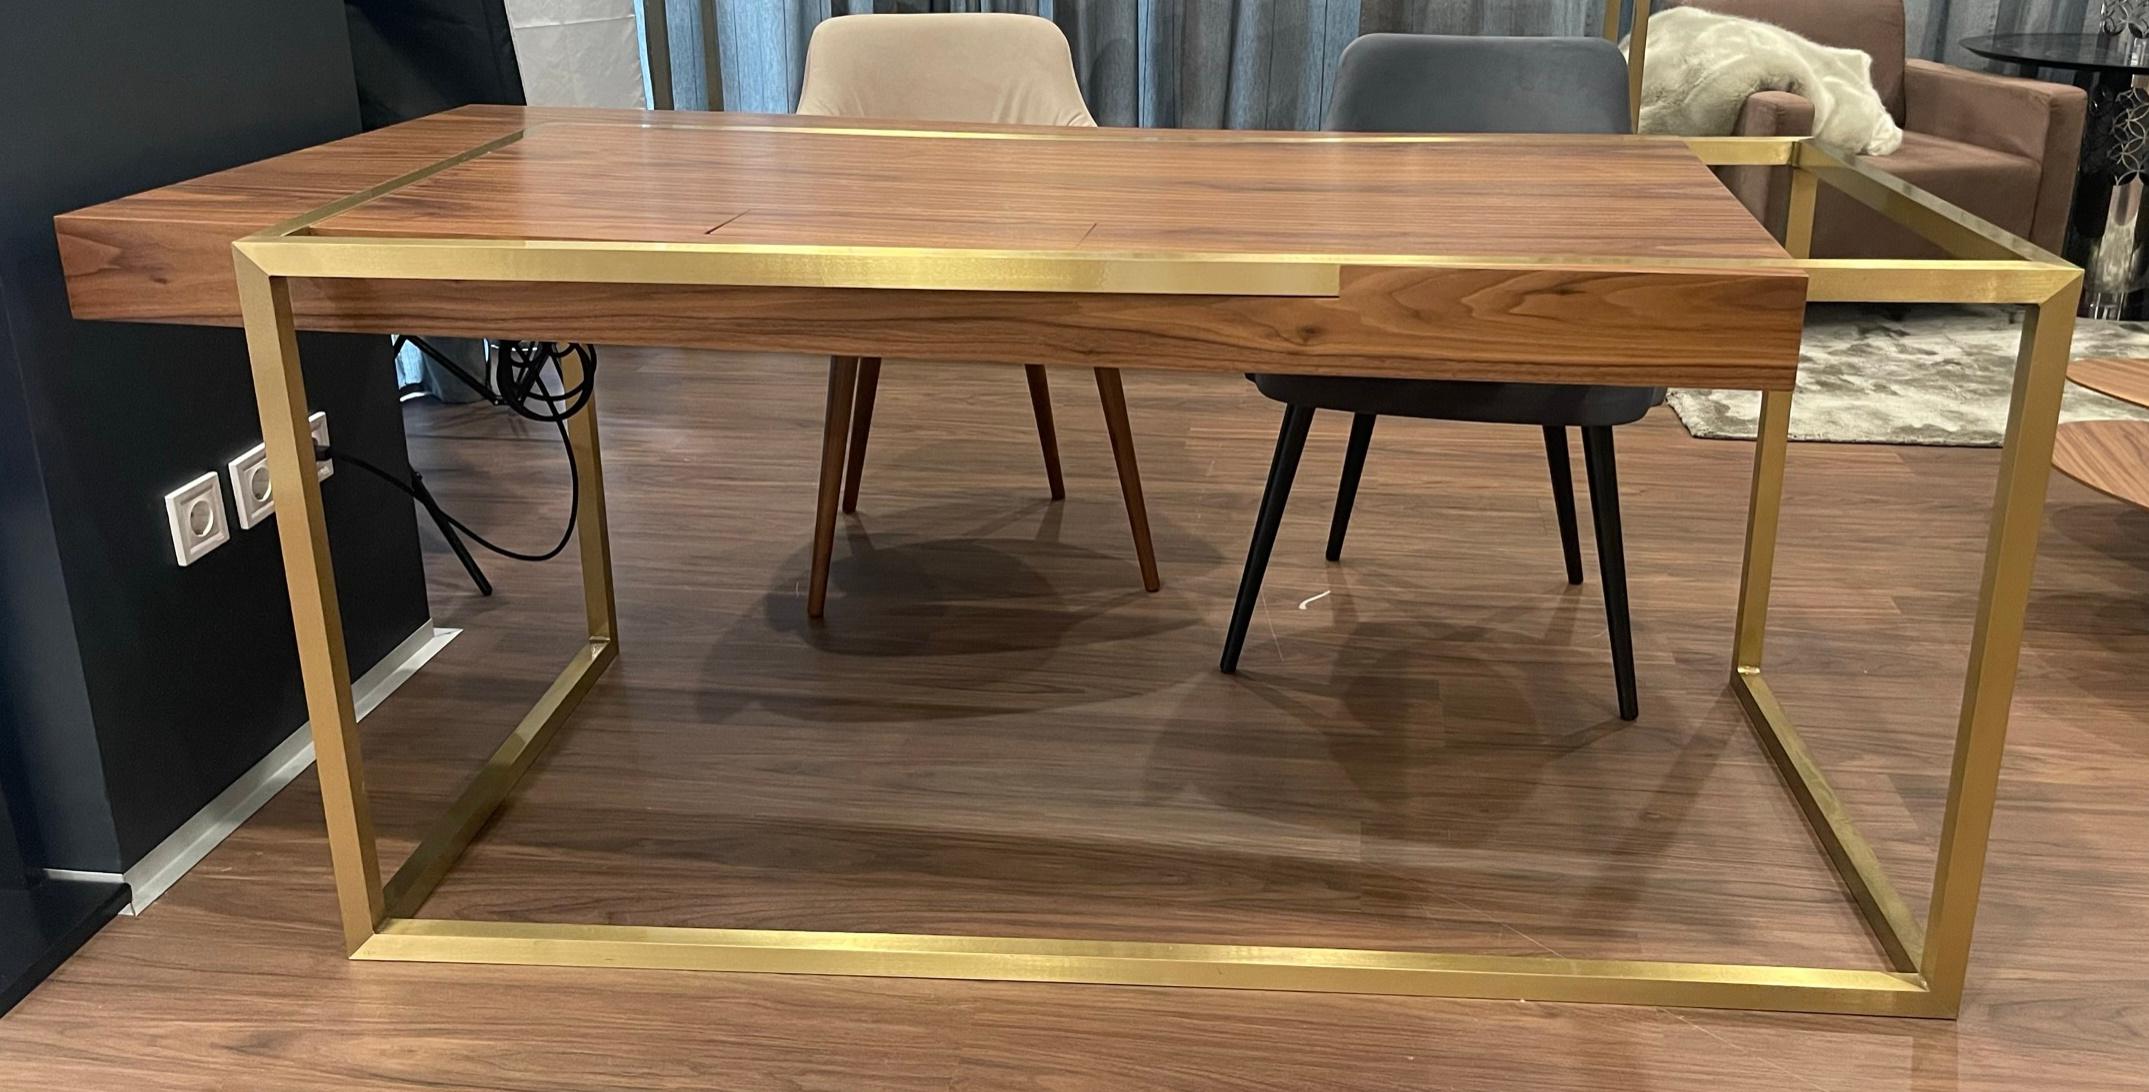 The Executive Desk ExCentric 2.0 listed here is made in walnut wood and brushed brass. The desk has two drawers, electrical plugs, and a wireless phone charger.
The piece is in excellent condition and was used as display furniture in our showroom in